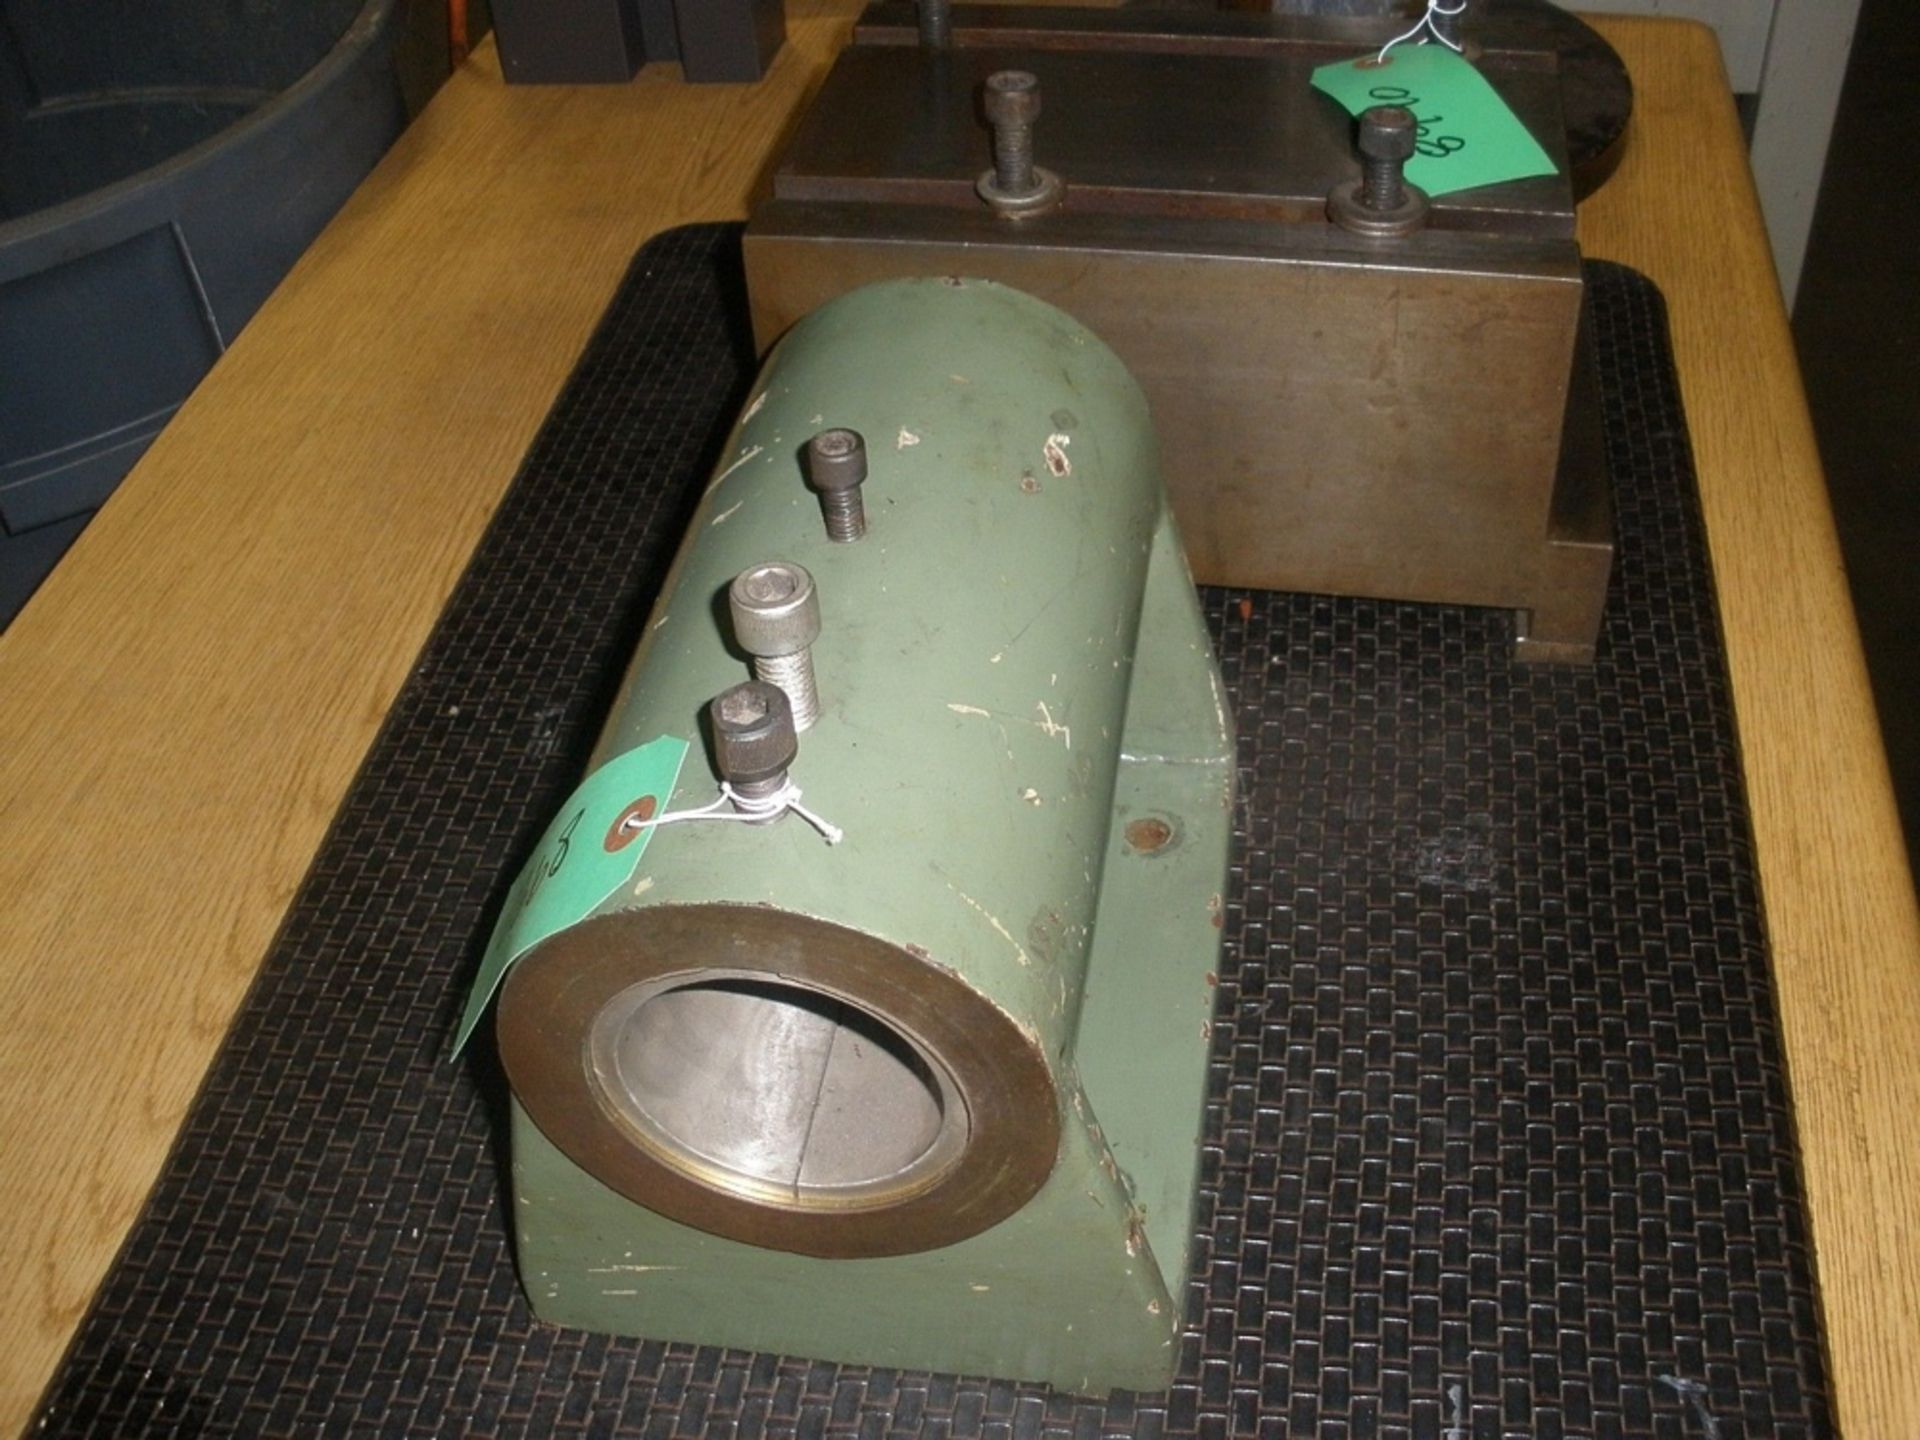 Kingstone HR2000 Engine Lathe Boring Bar Tool Post with Riser 3 1/2" iD Center Line without Riser 5" - Image 3 of 4